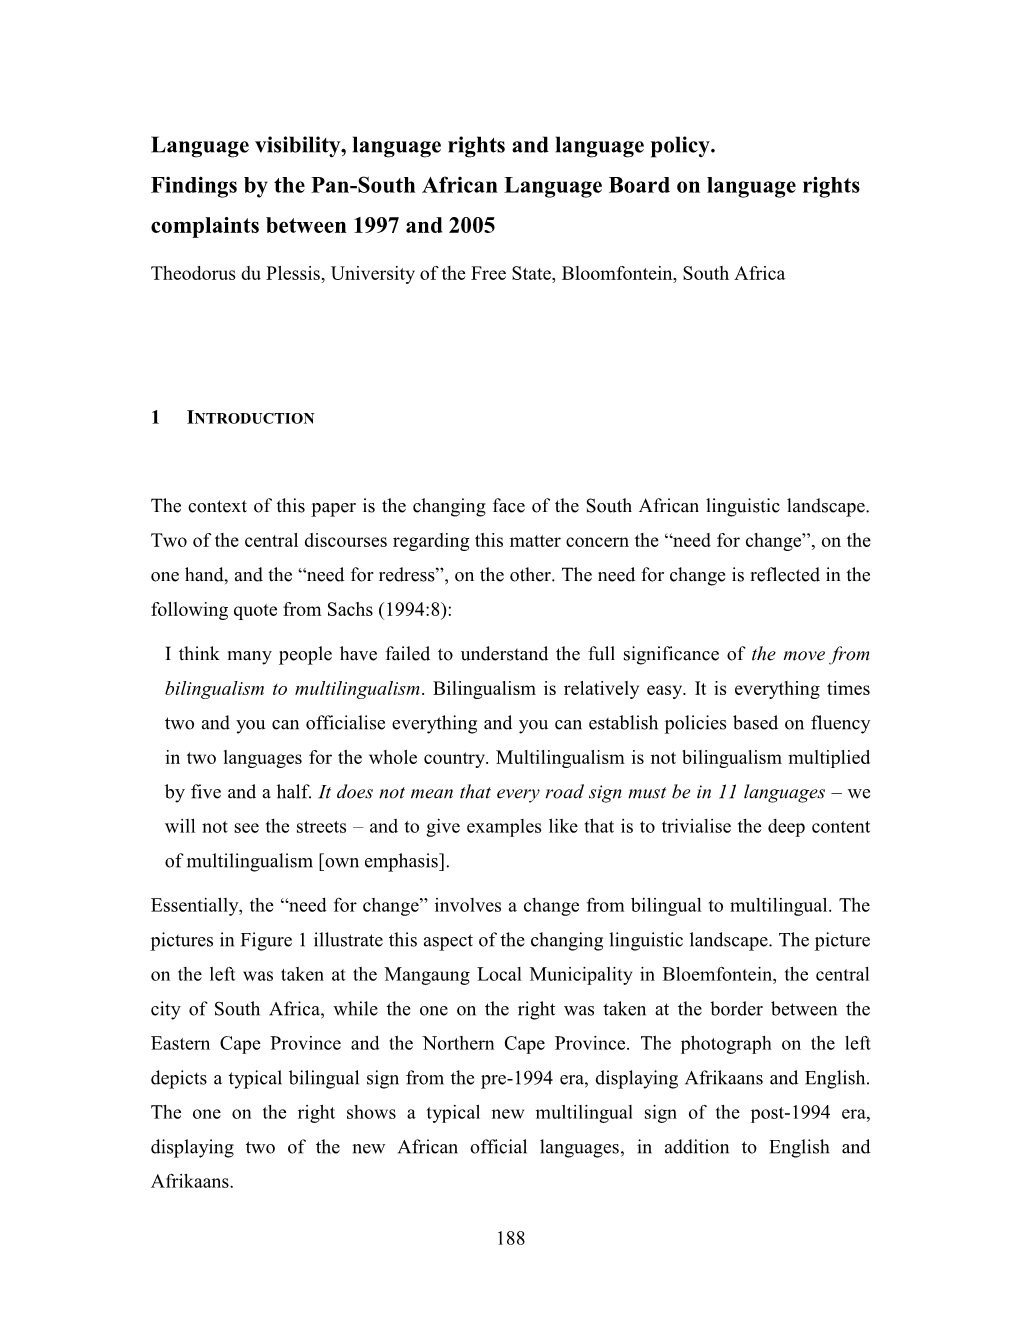 Language Visibility, Language Rights and Language Policy